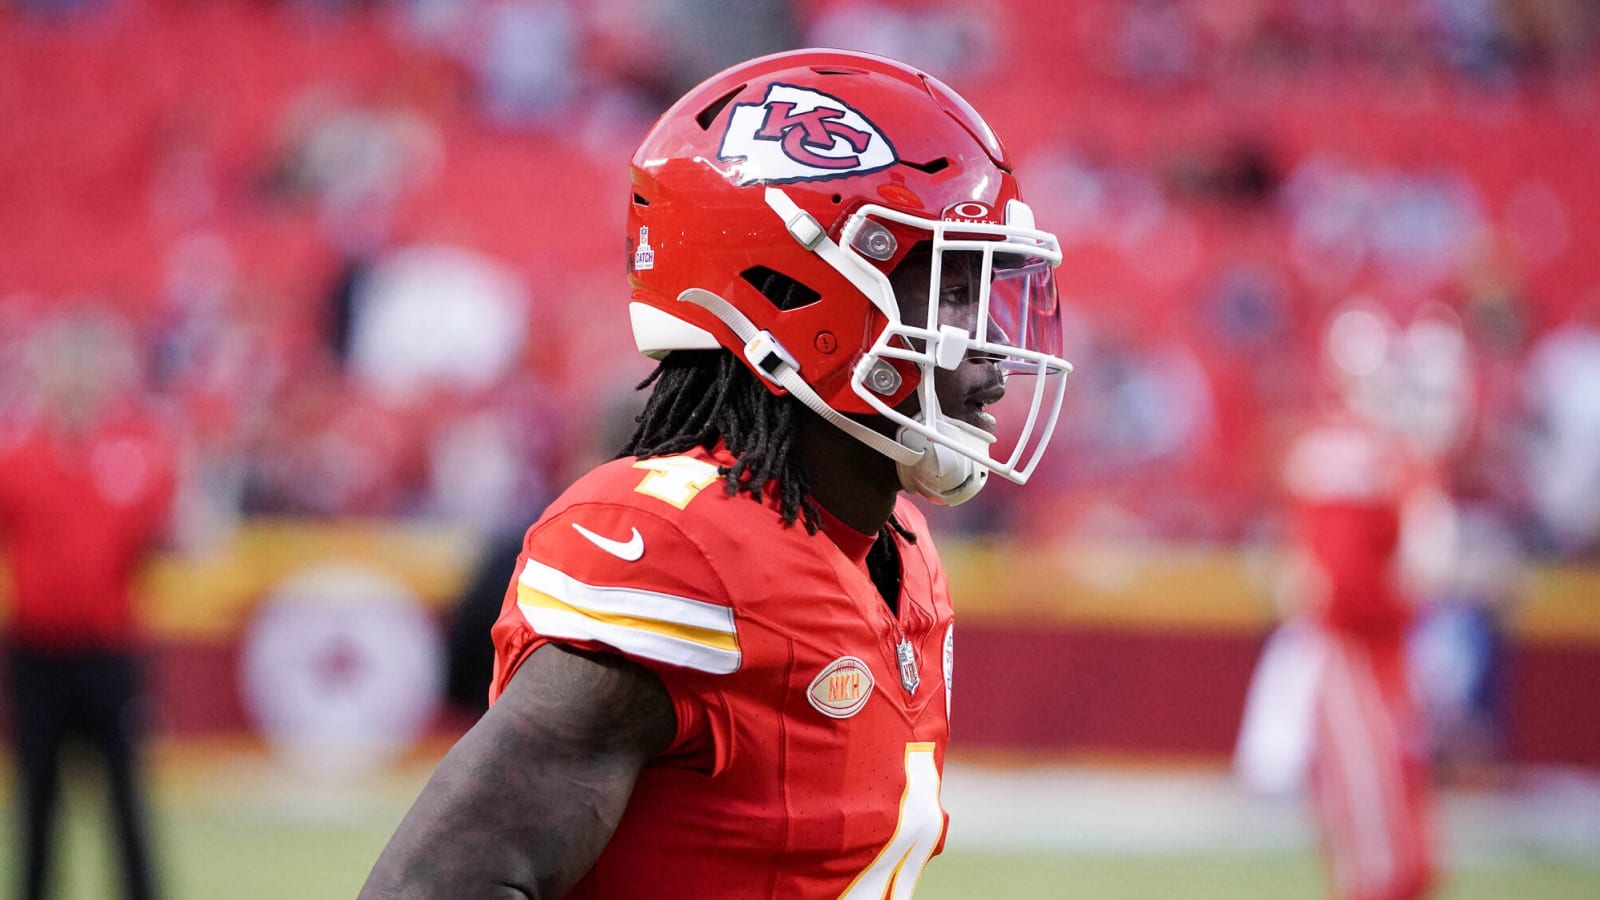 Report: Kansas City Chiefs WR 'likely' to receive punishment from NFL